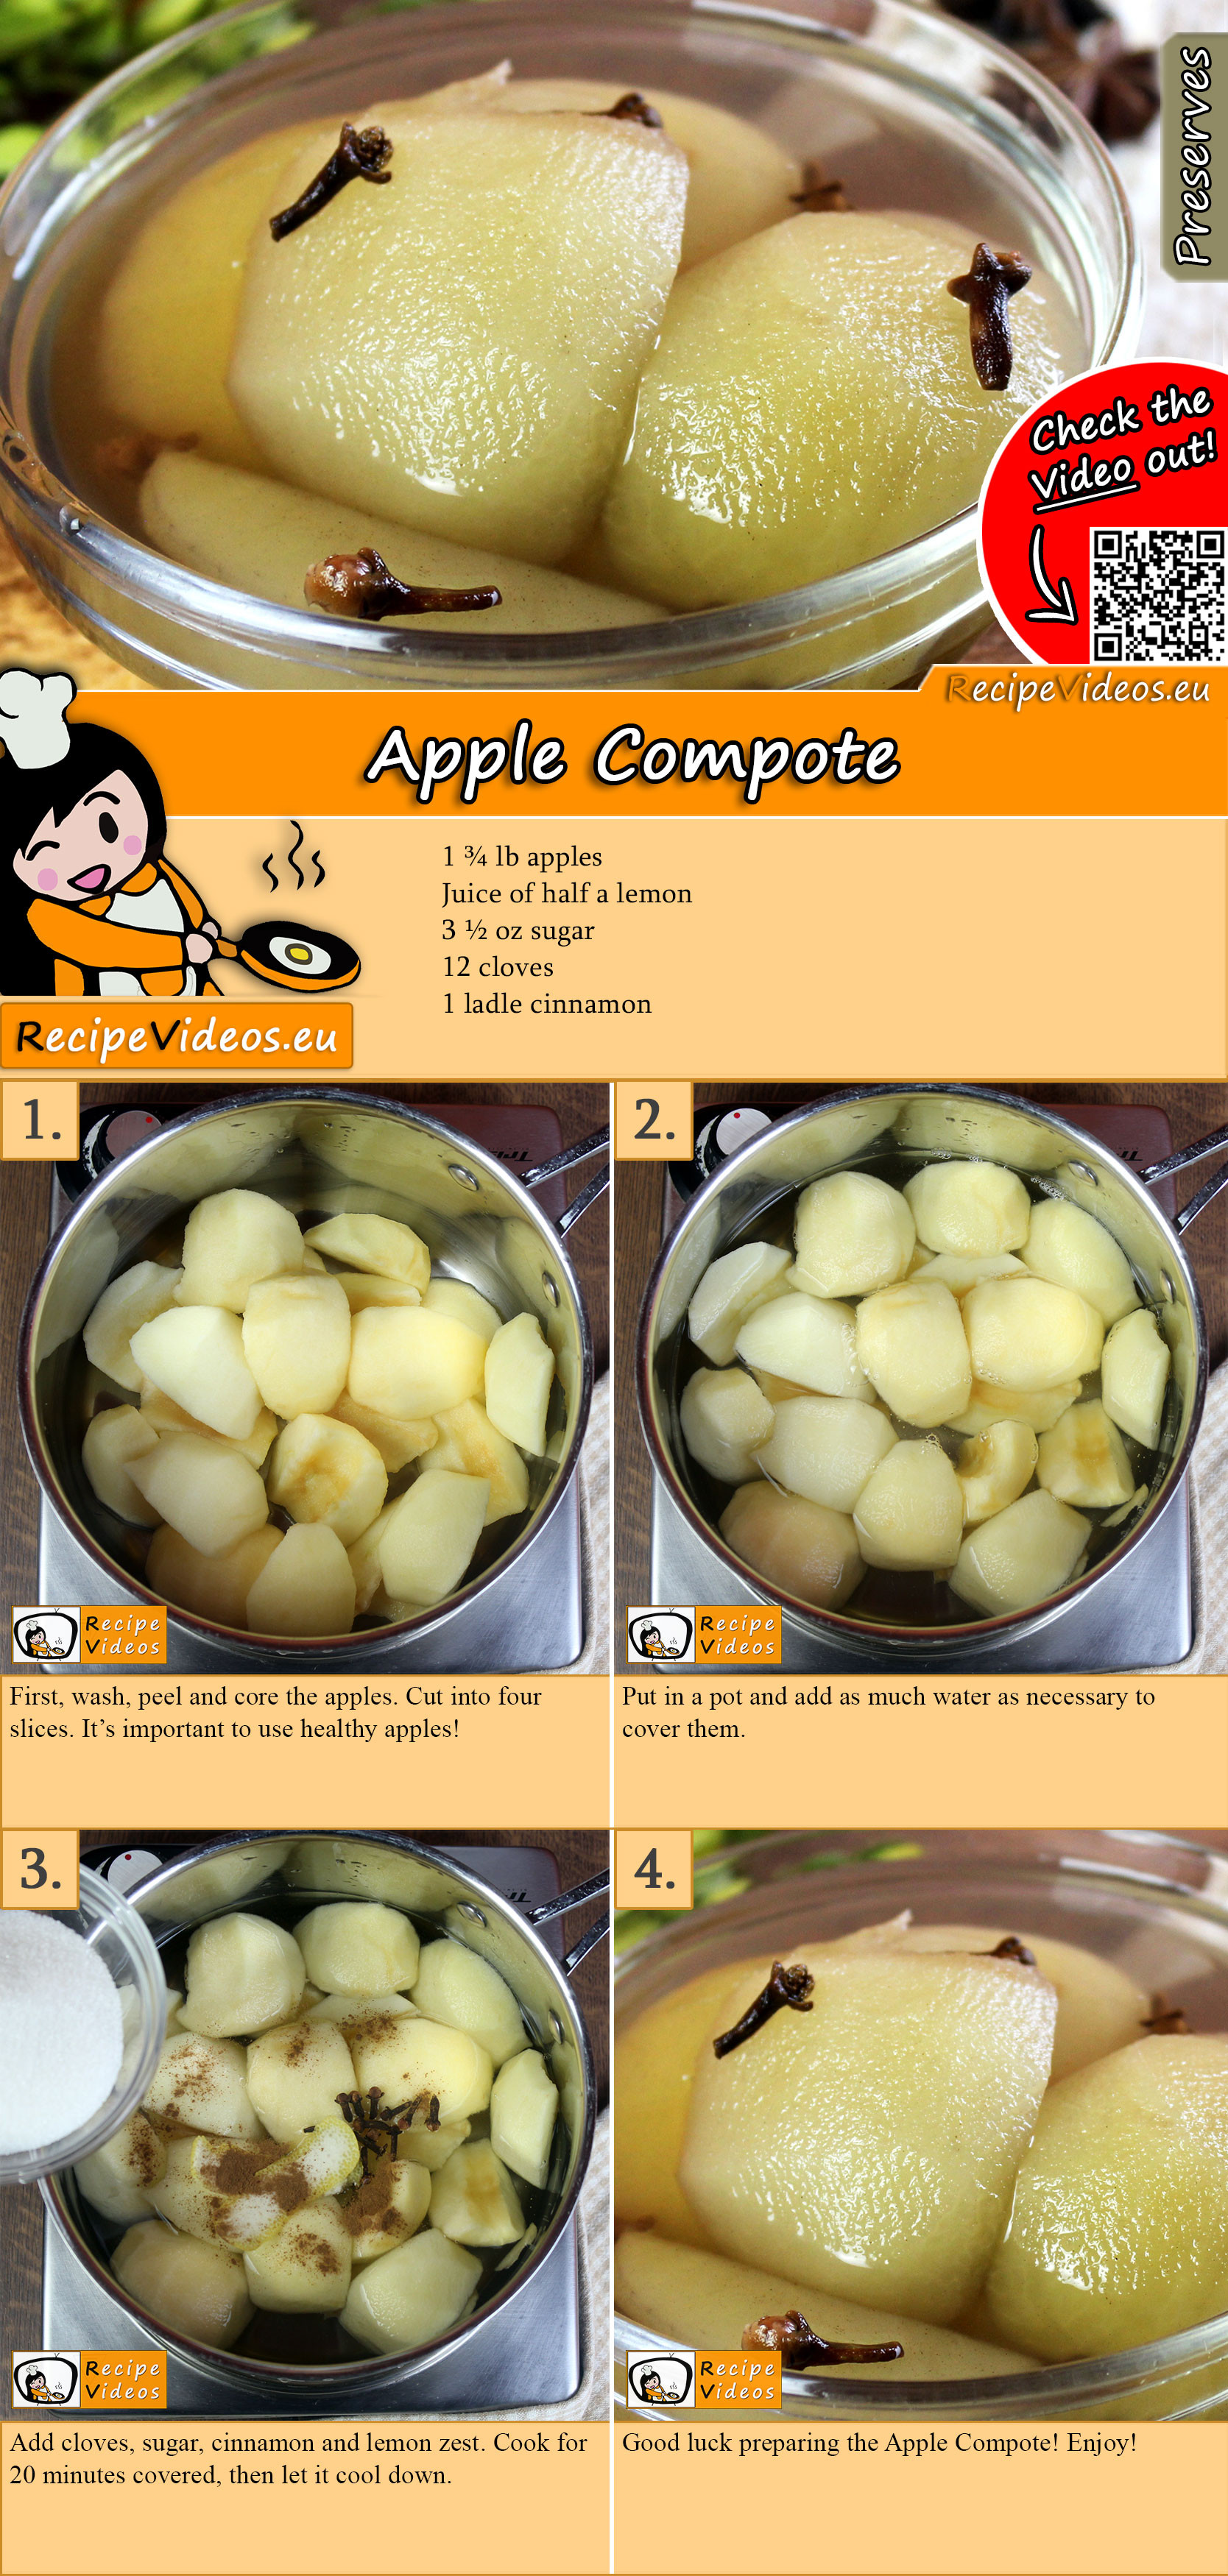 Apple compote recipe with video